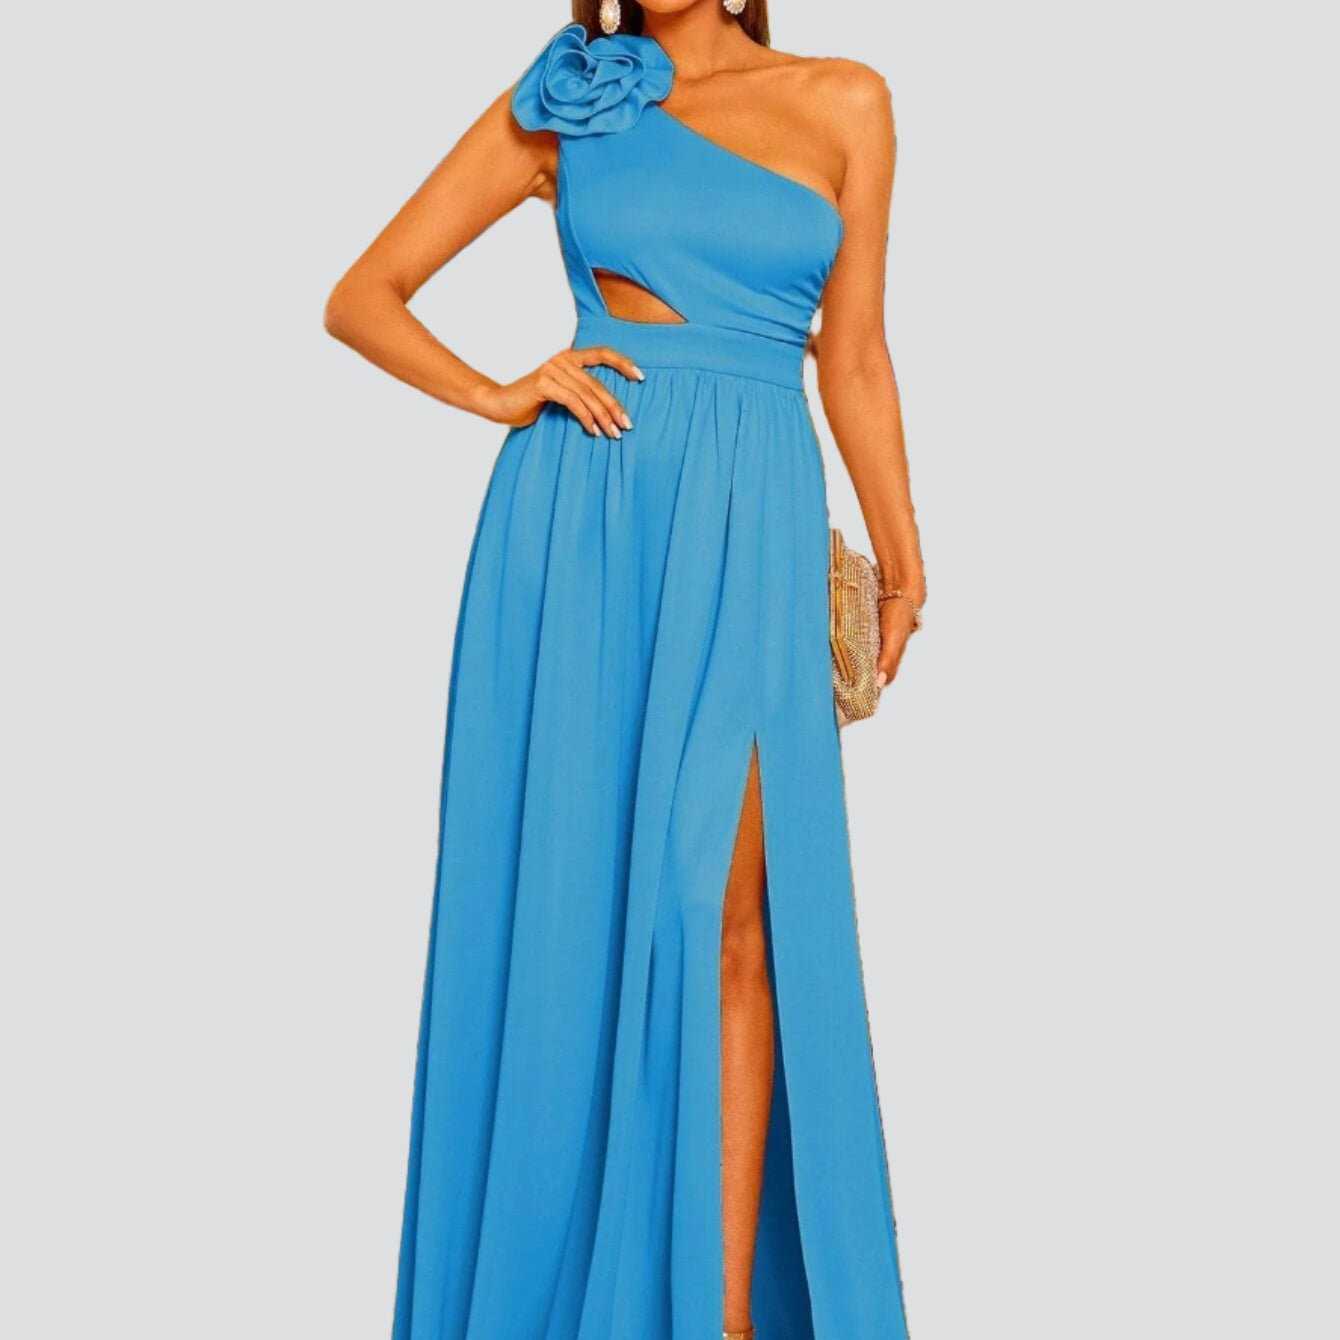 Cutout Floral One Shoulder Prom Dress WY006